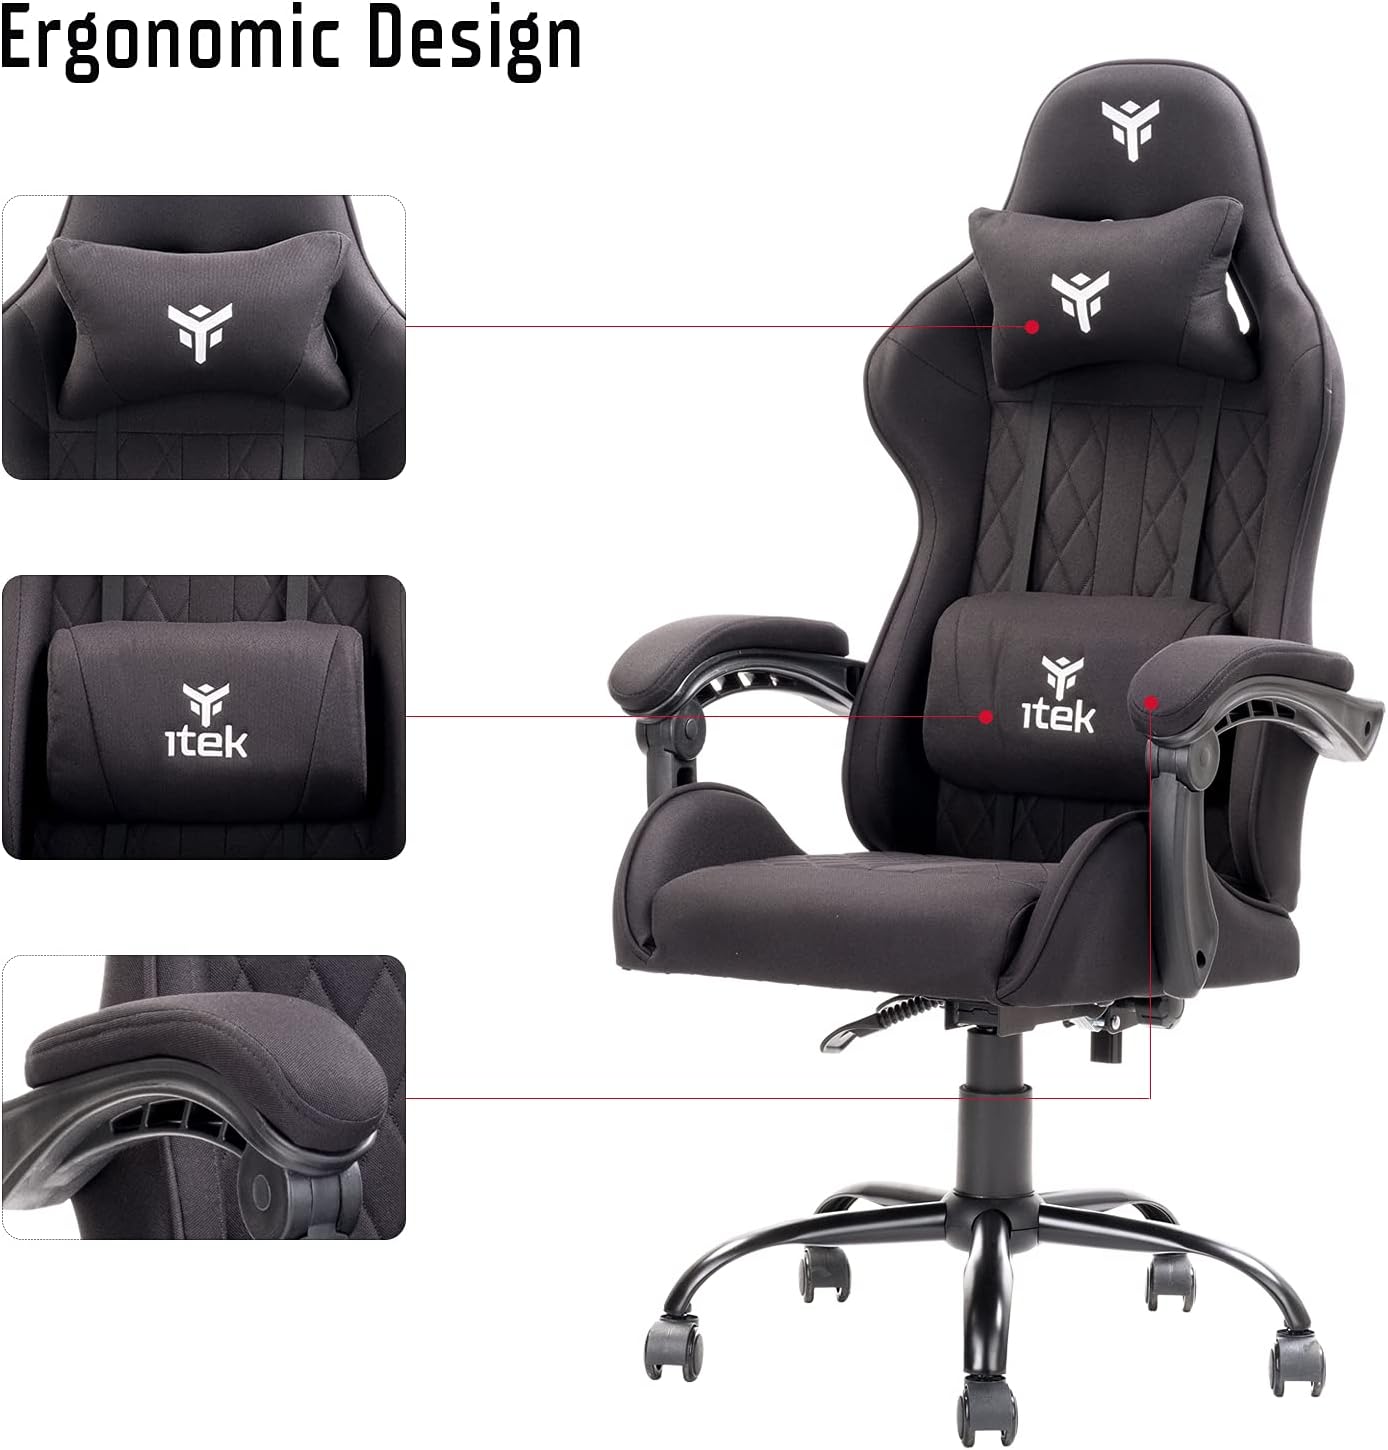 ITEK BLACK GAMING SEAT IN FABRIC, RECLINING BACKREST, DOUBLE CUSHION, Gaming Chair RHOMBUS FF10 